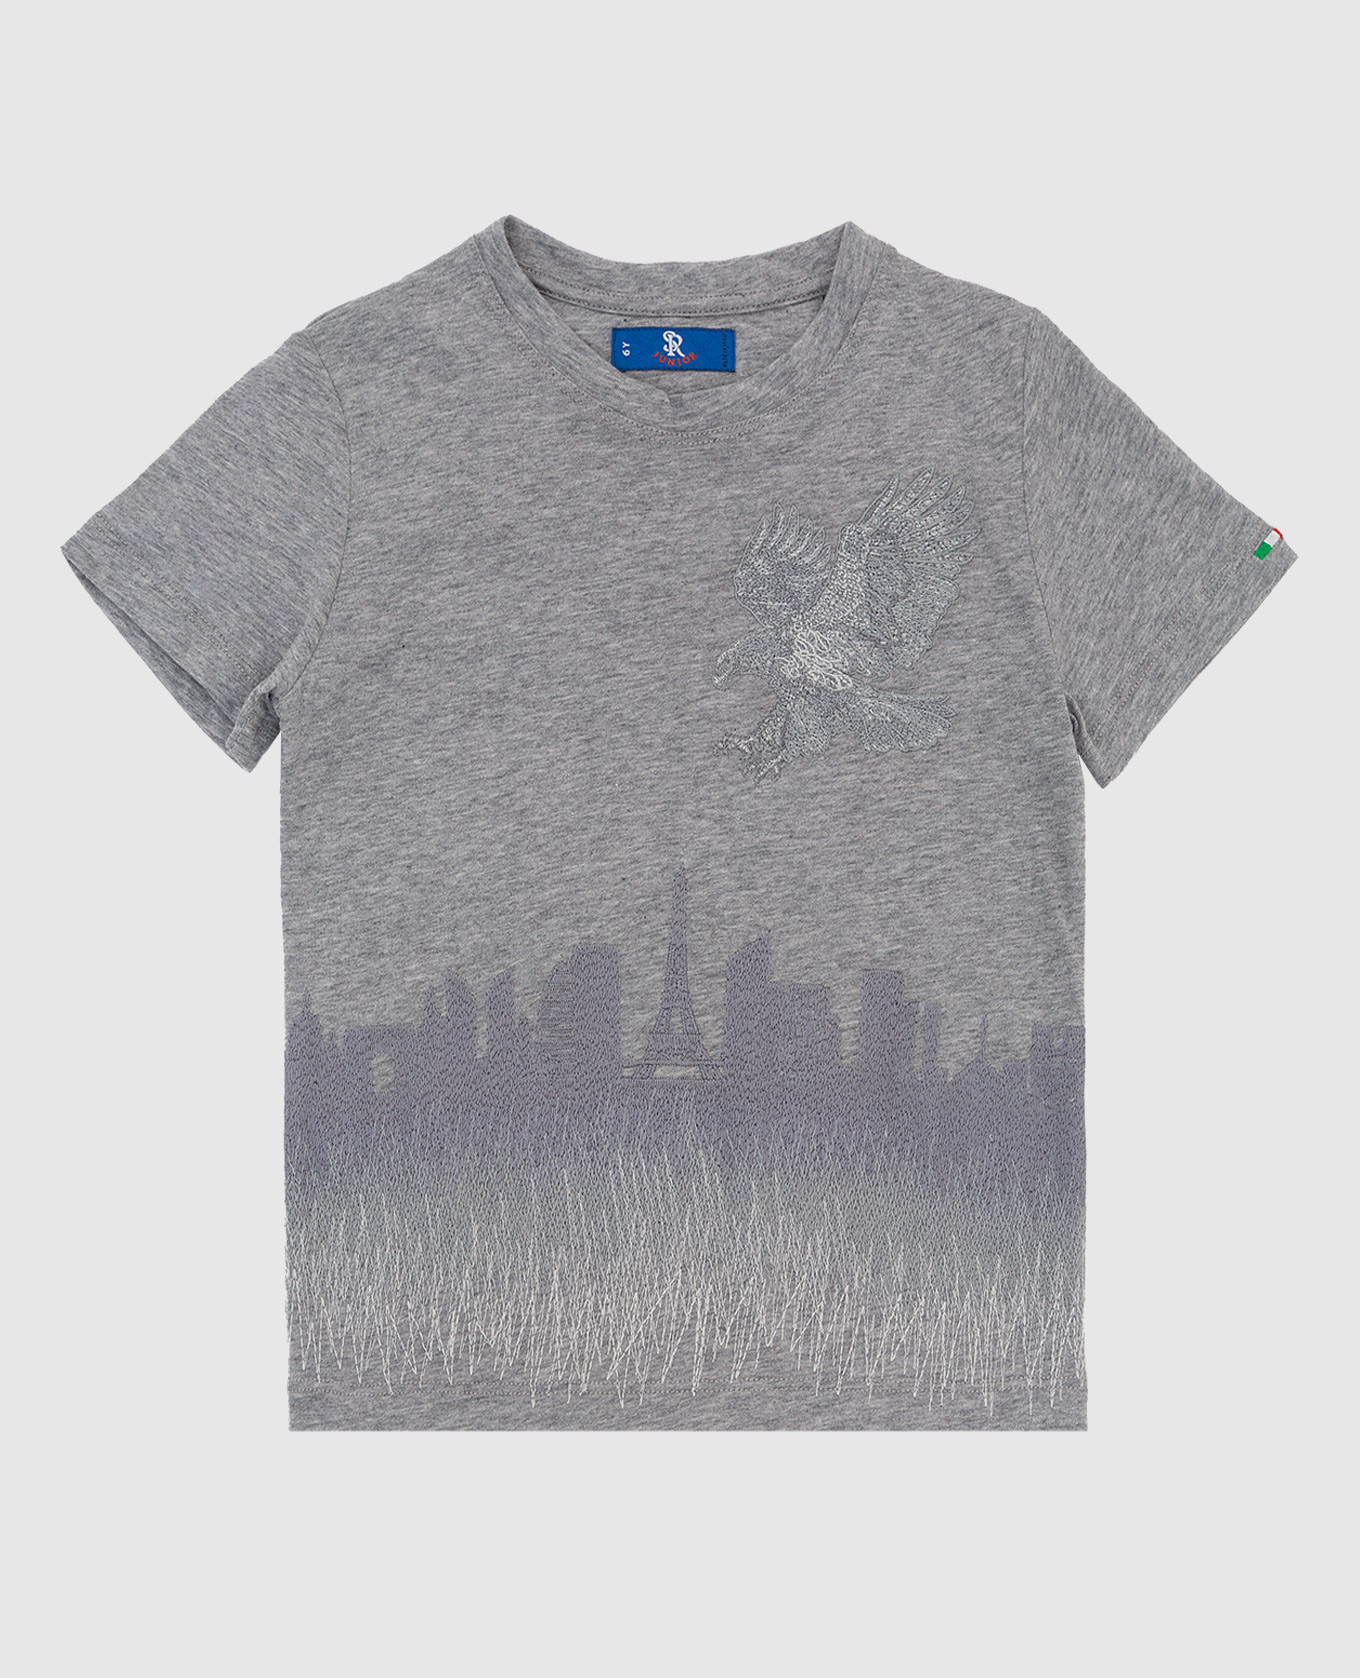 Children's gray t-shirt with embroidery